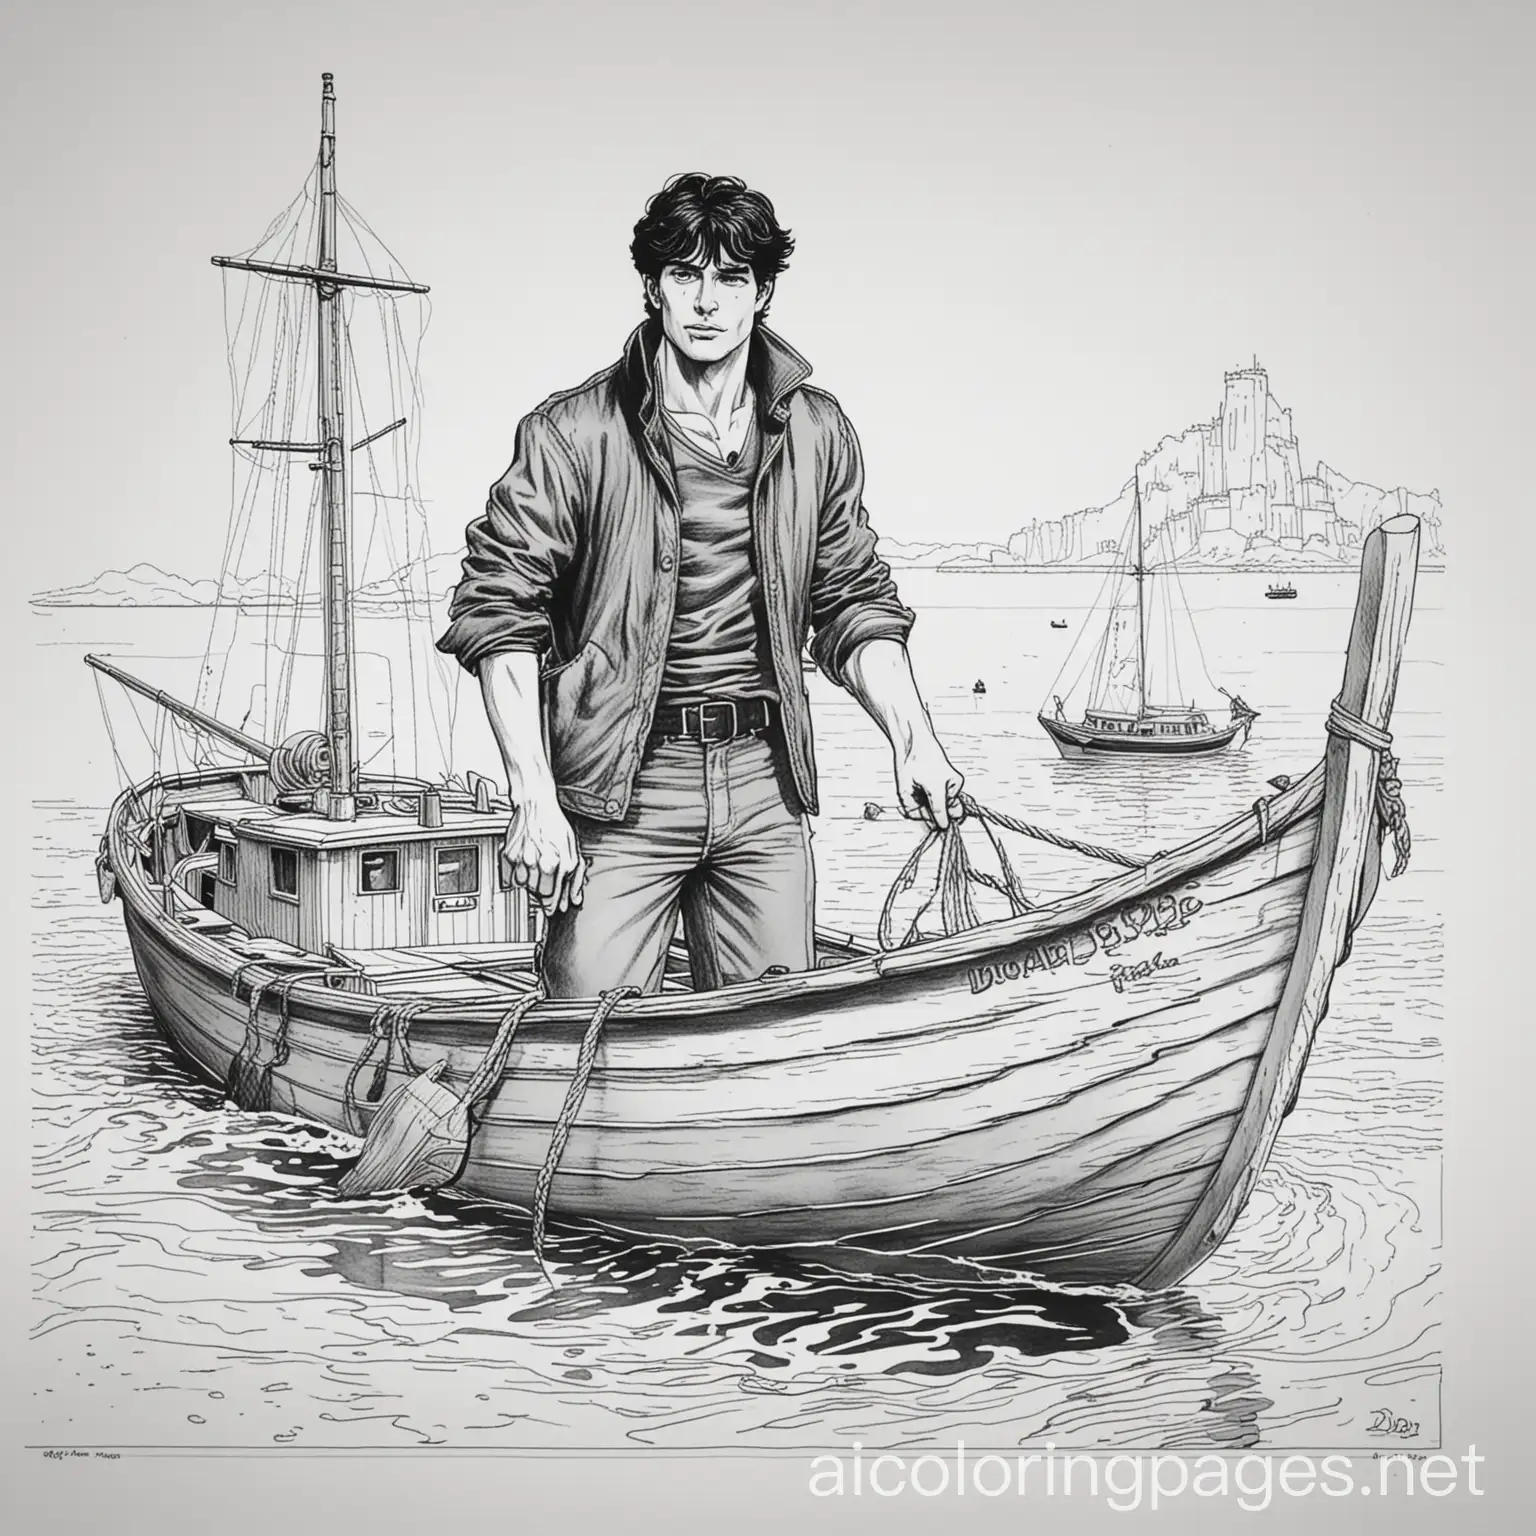 Dylan dog building boat, Coloring Page, black and white, line art, white background, Simplicity, Ample White Space. The background of the coloring page is plain white to make it easy for young children to color within the lines. The outlines of all the subjects are easy to distinguish, making it simple for kids to color without too much difficulty